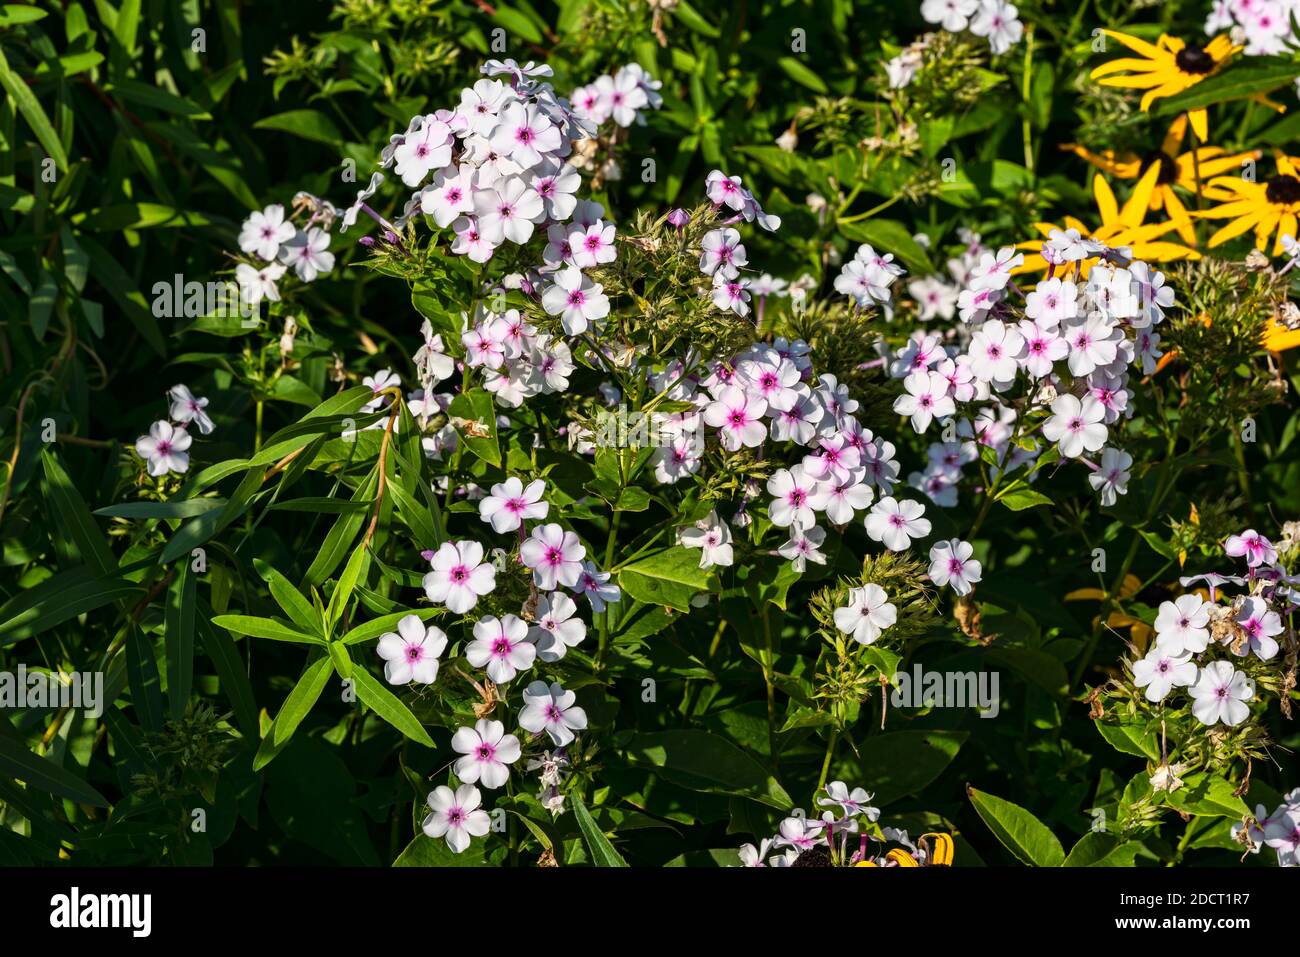 Phlox paniculata 'White Admiral' an herbaceous summer autumn flower plant, stock photo image Stock Photo